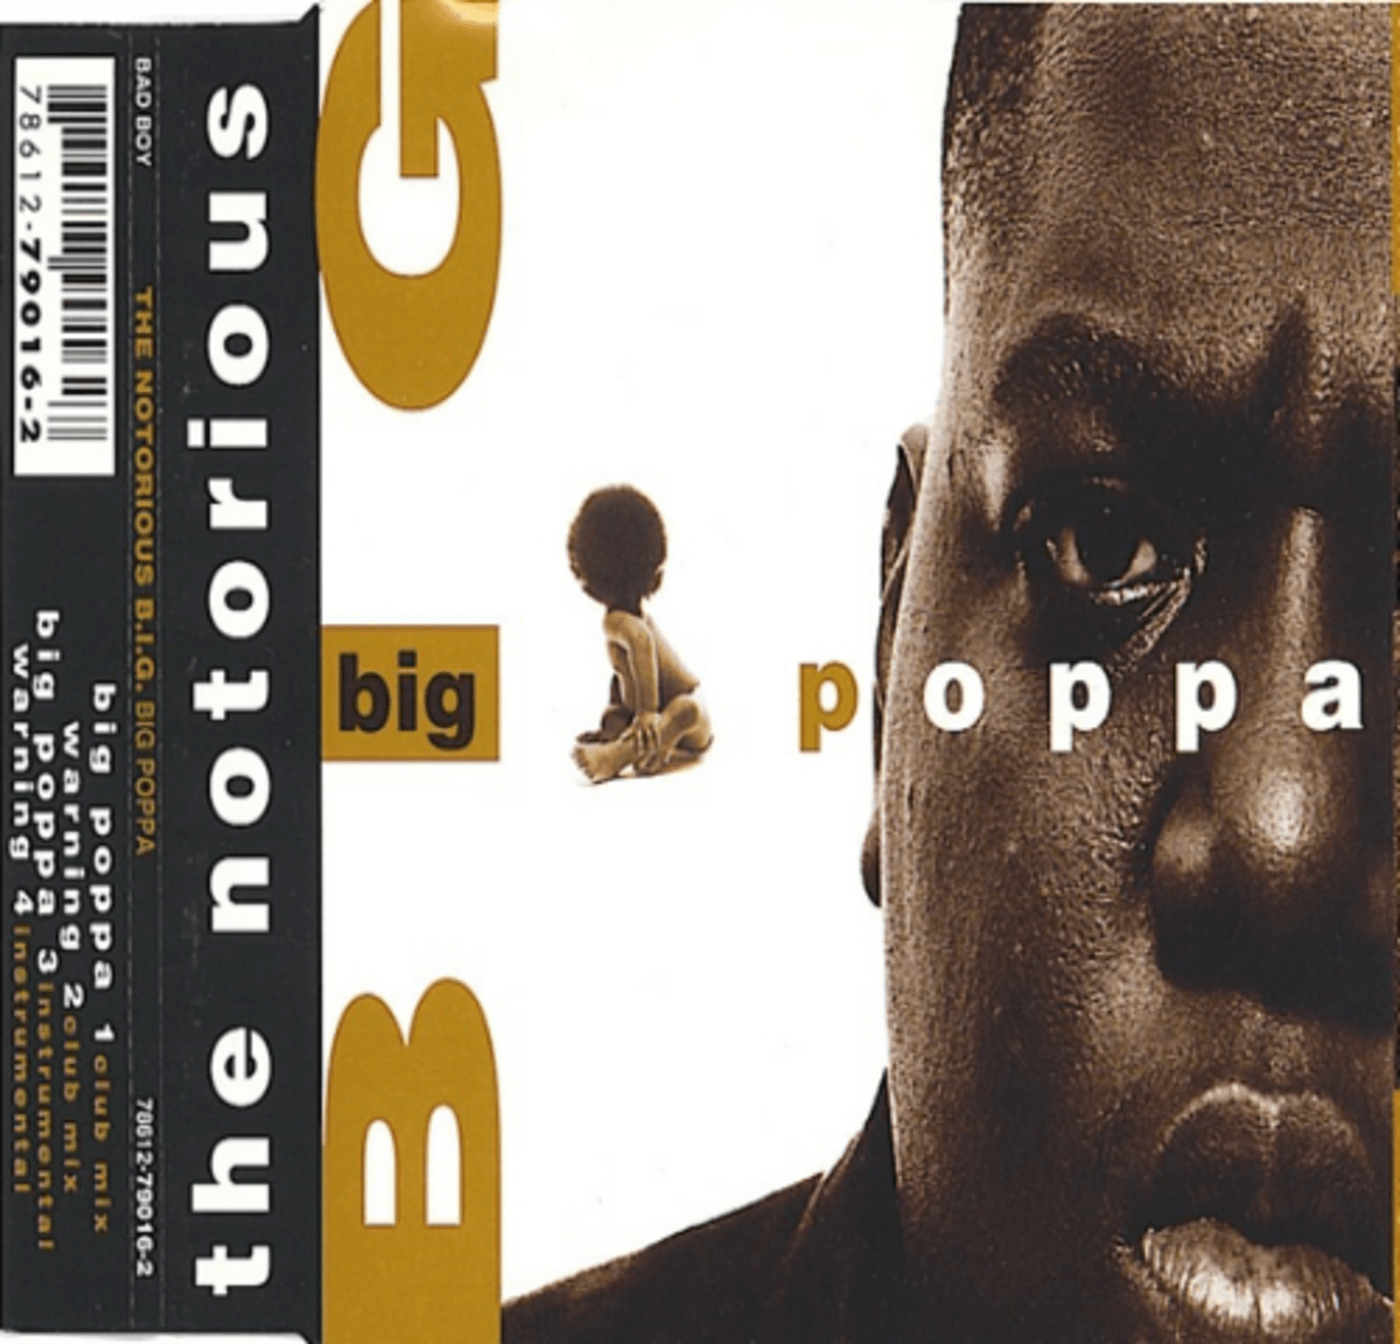 the notorious b.i.g. unbelievable sample chops